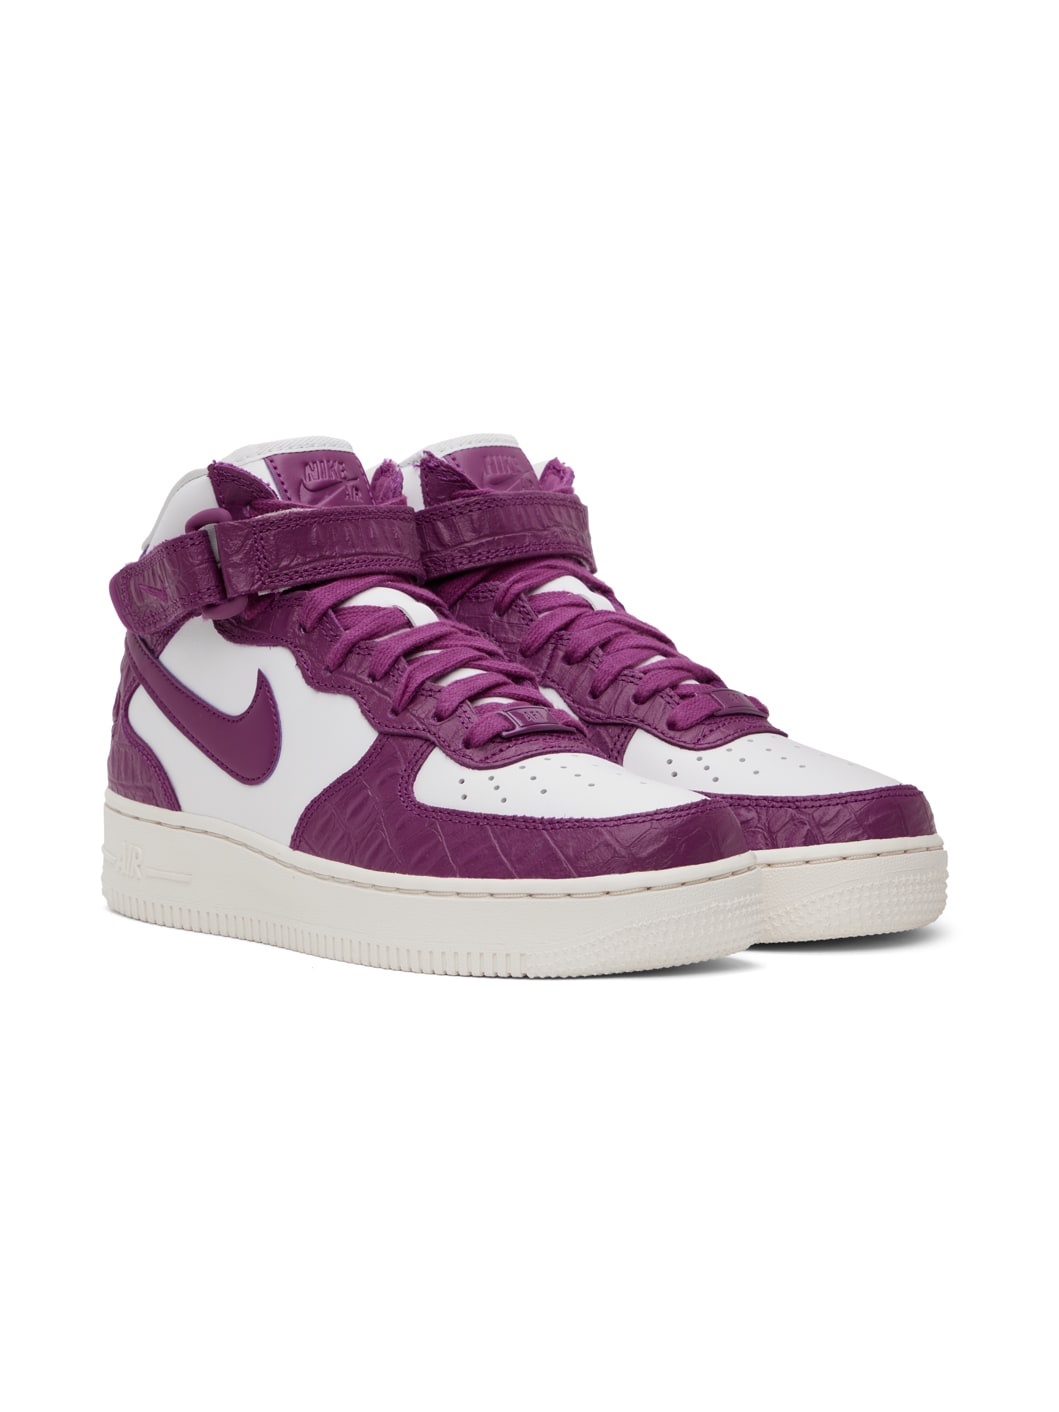 Purple & White Air Force 1 '07 Sneakers - 4